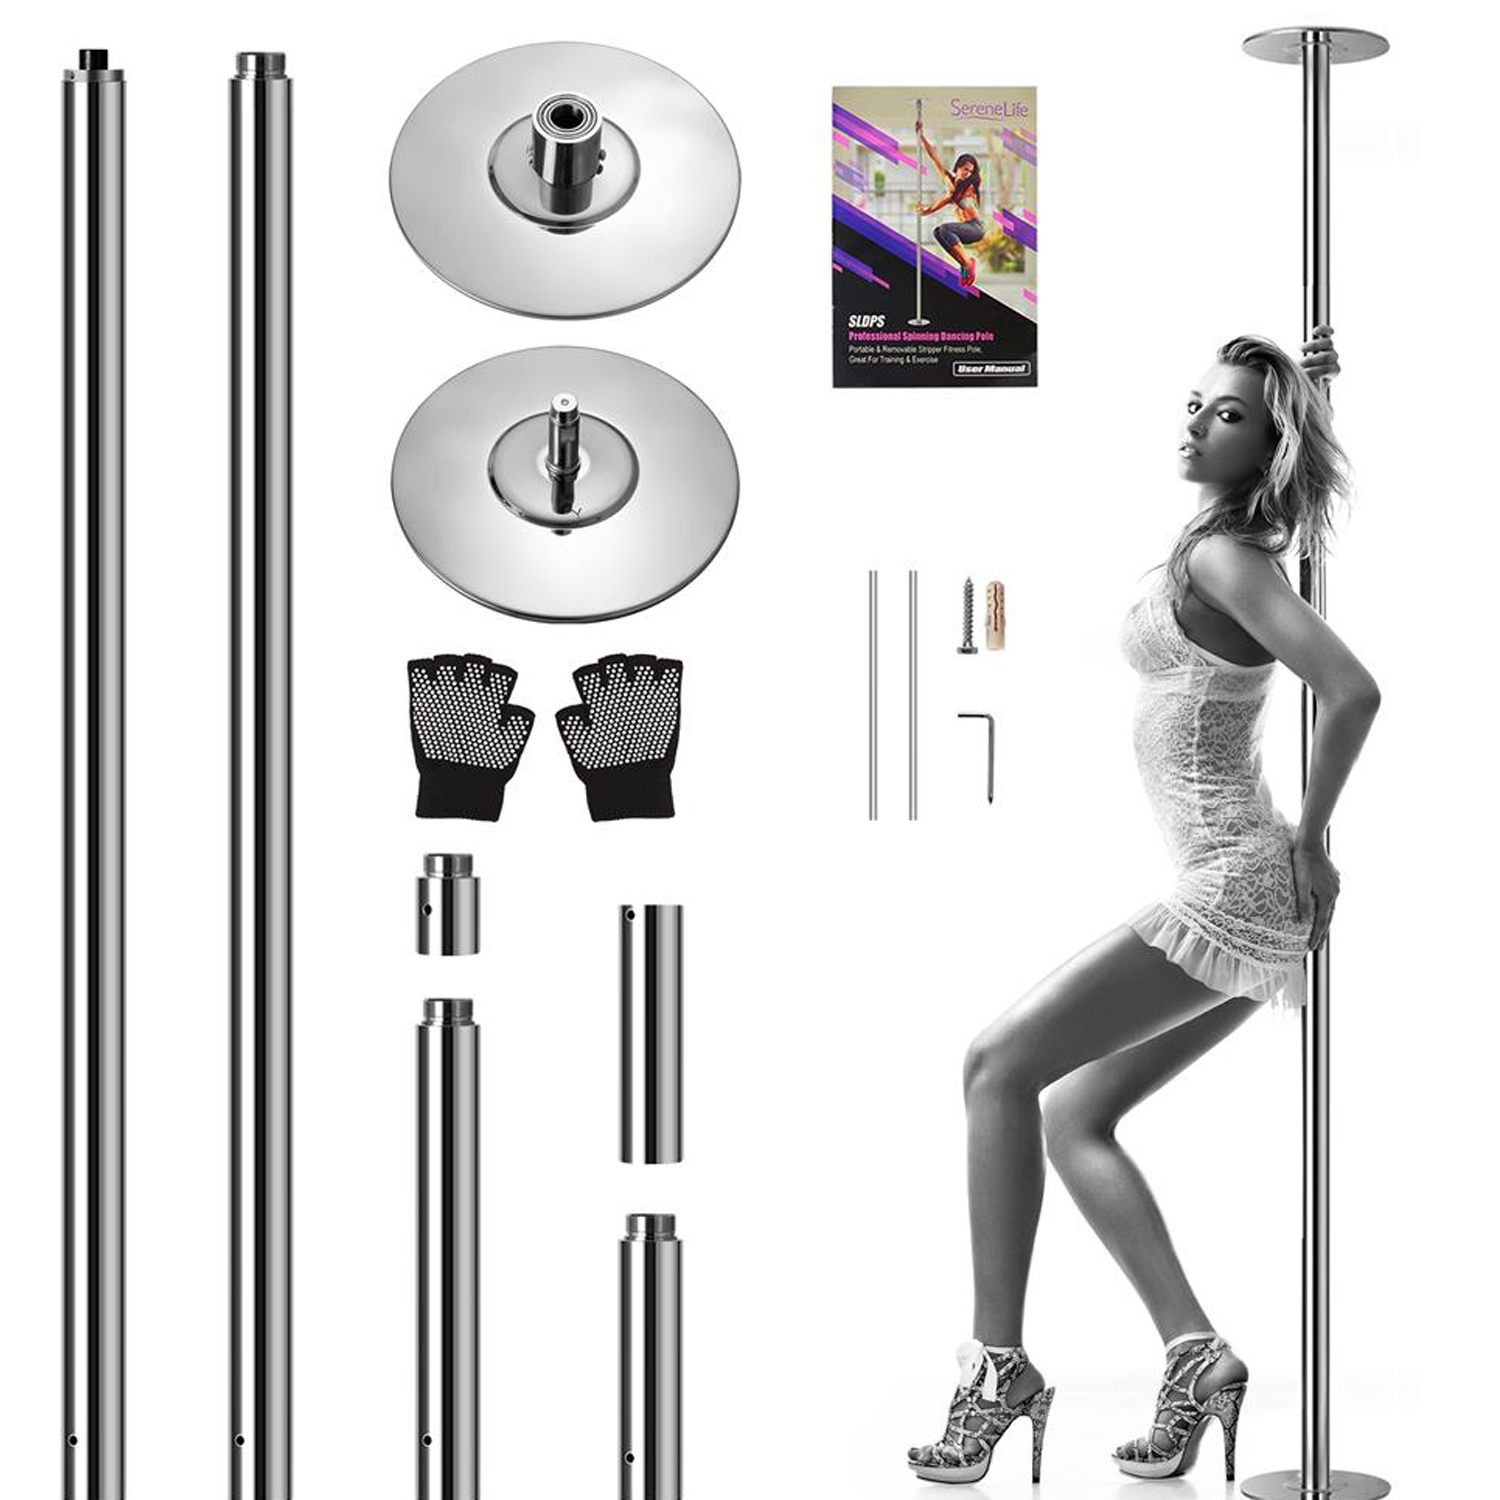 SereneLife SLDPS - Professional Spinning Dancing Pole - Portable & Removable Stripper Fitness Pole, Great For Training & Exercise - image 1 of 8